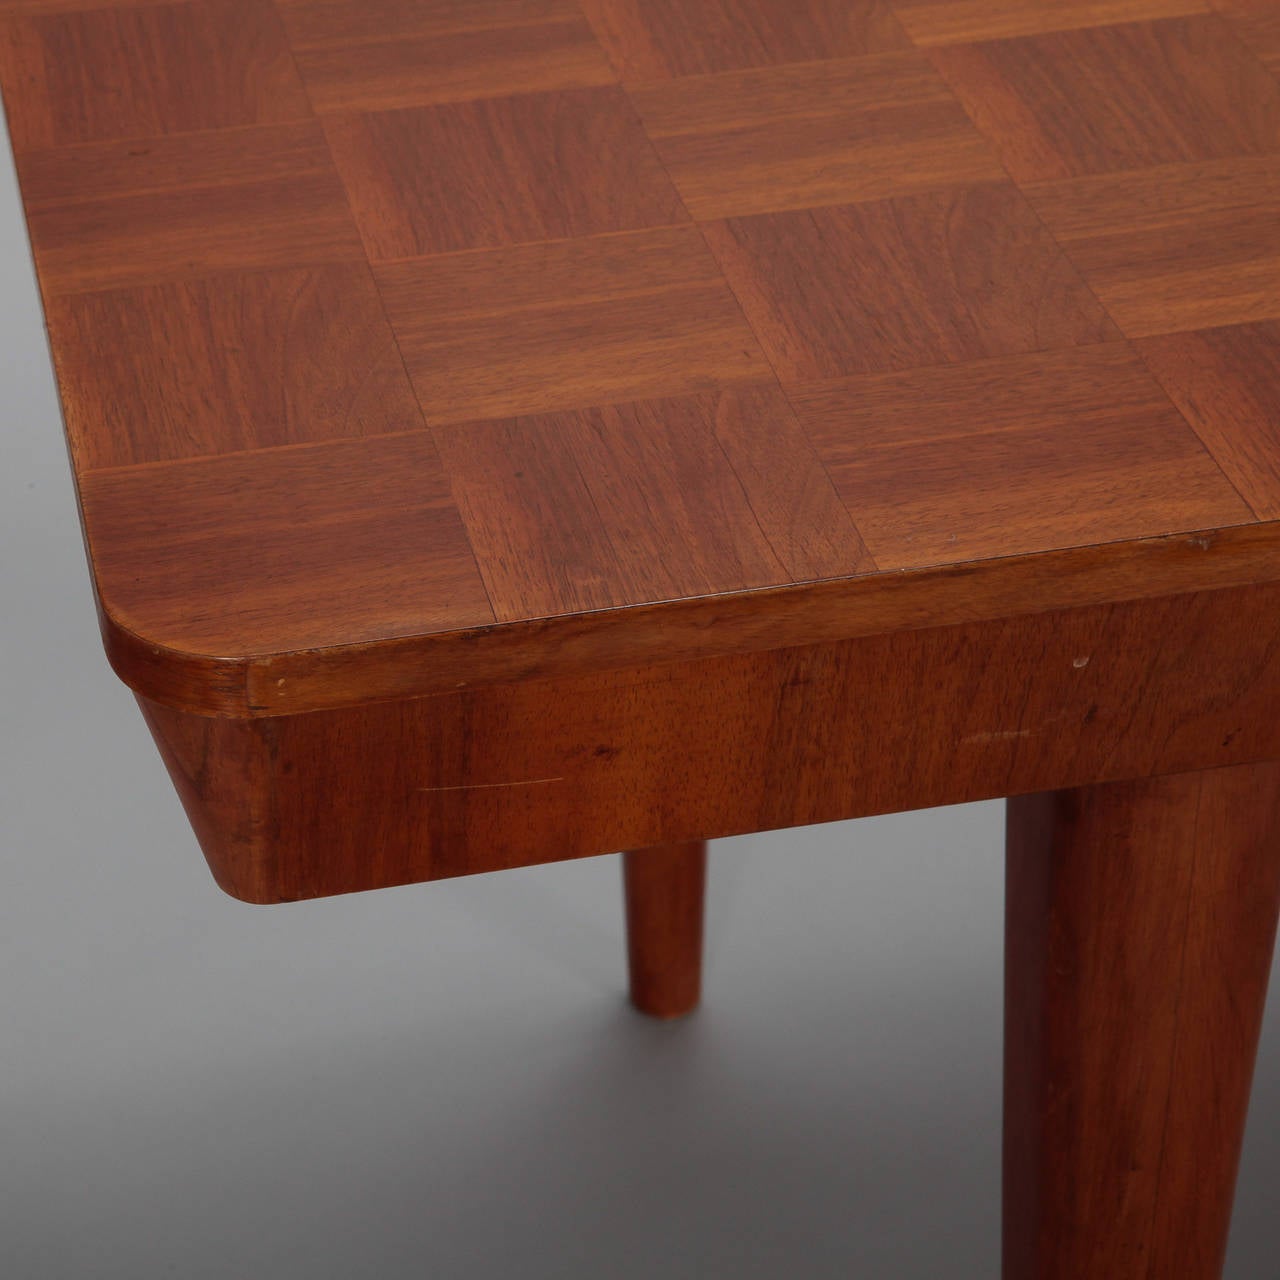 Czech Jindrich Halabala for UP Zavody Checkerboard Table with Internal Leaf